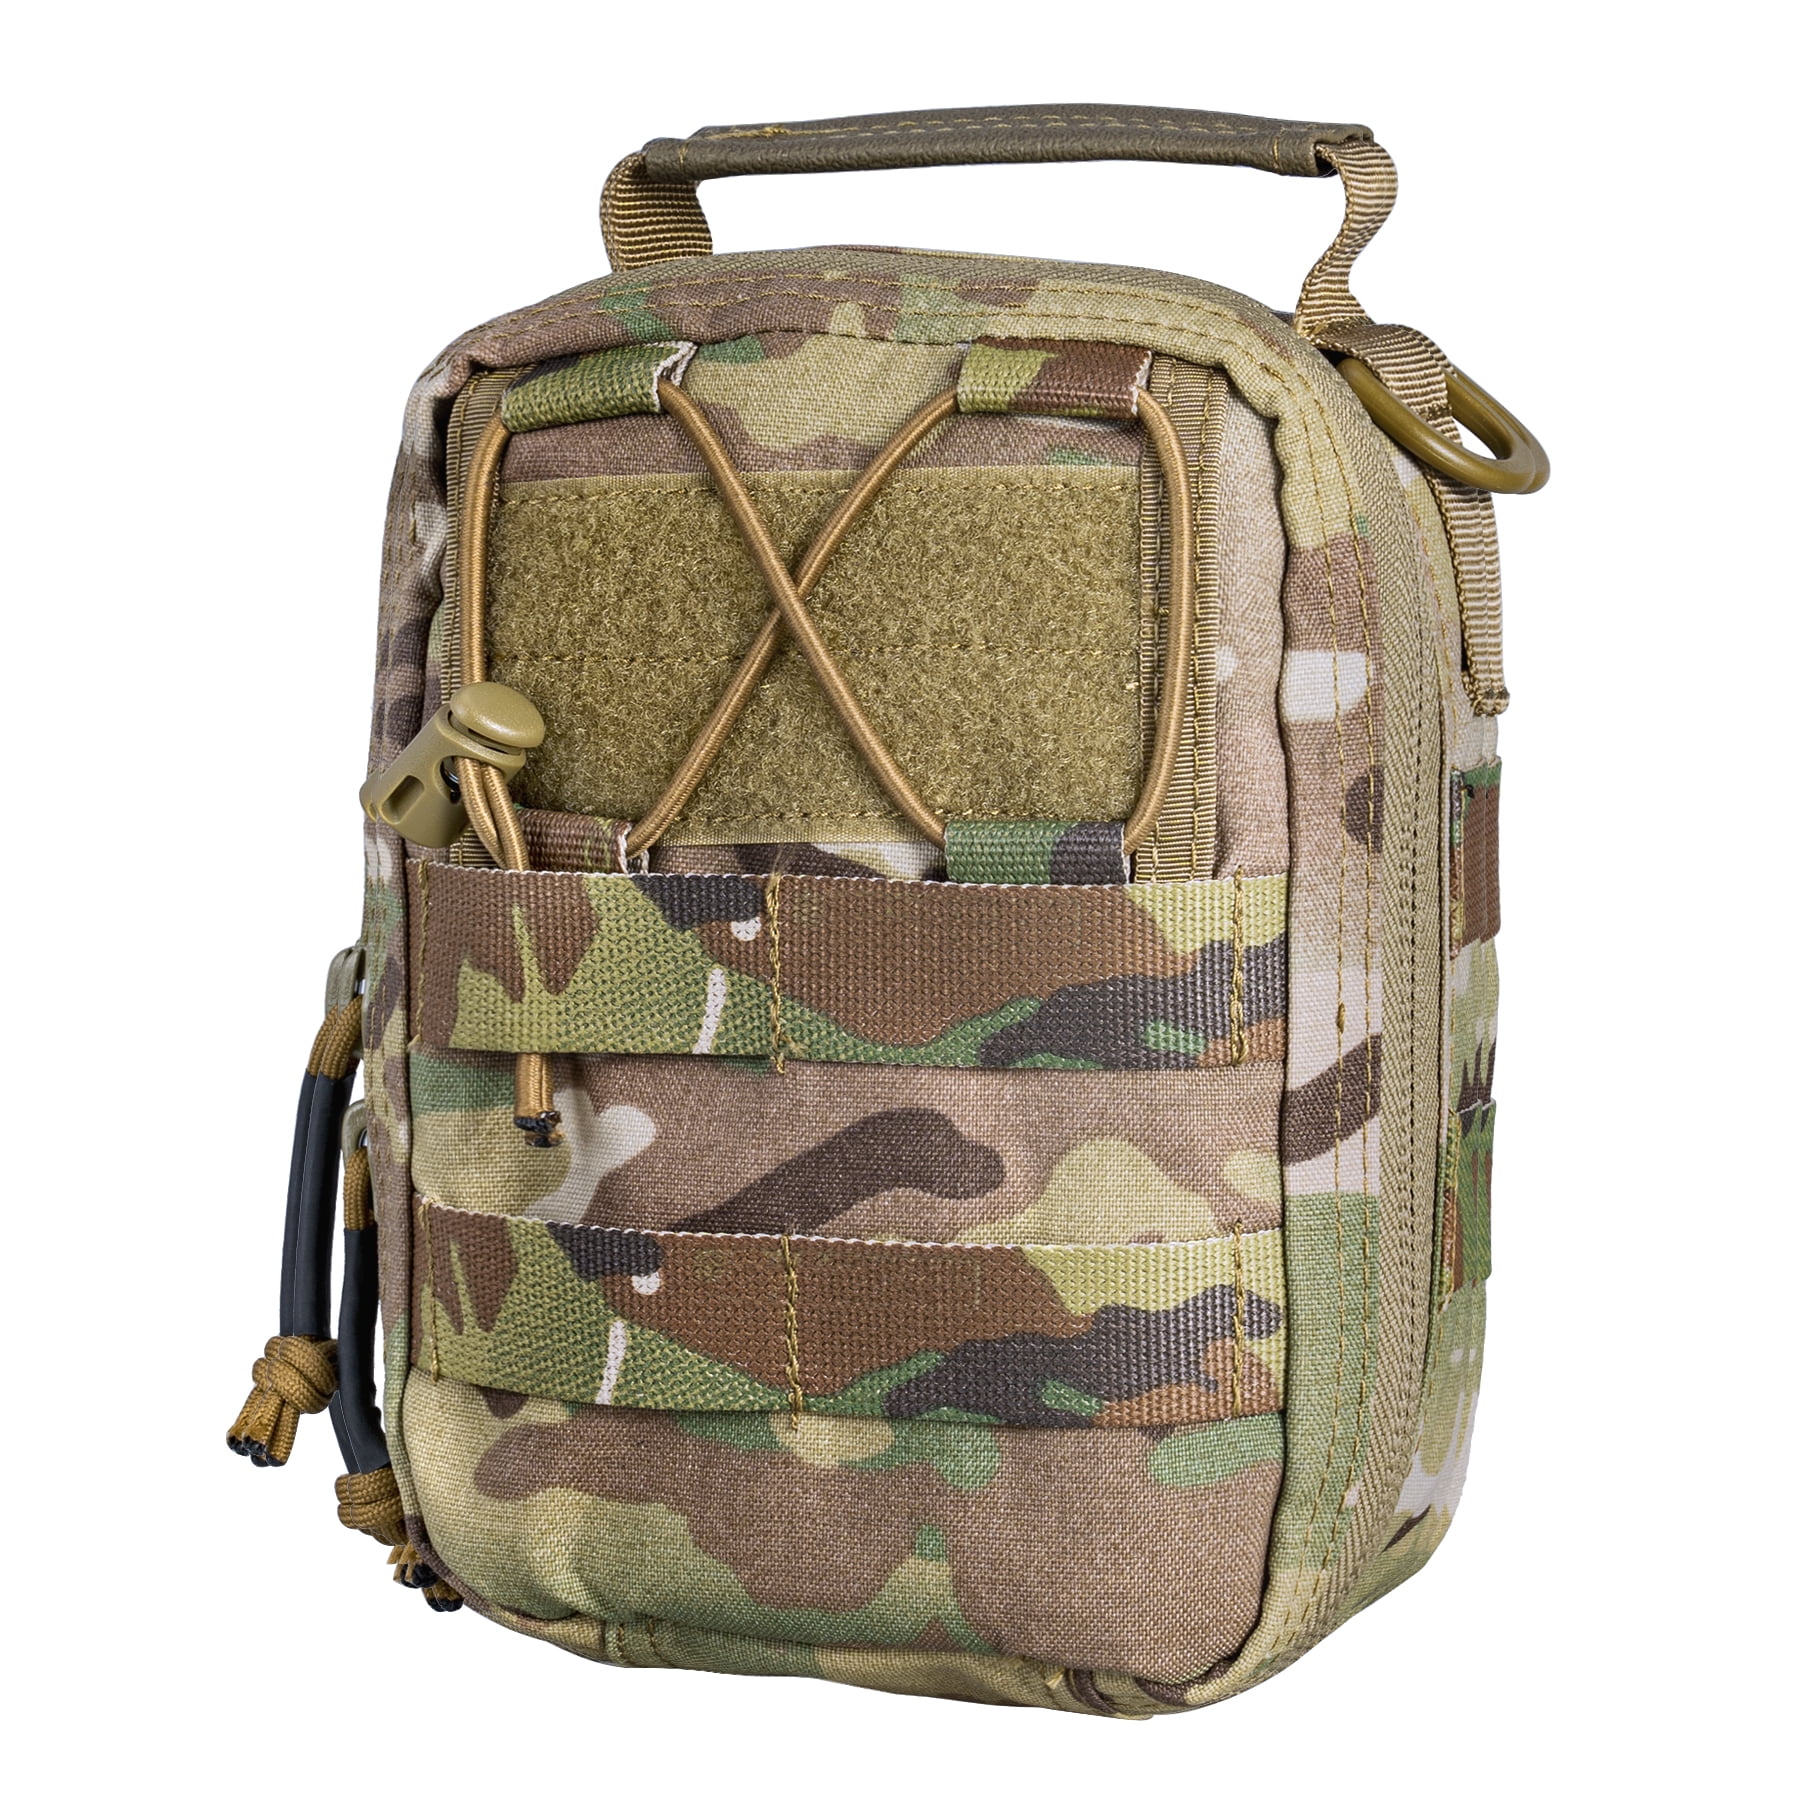 New Molle Rack Utility Pouch 6 Colors--Airsoft